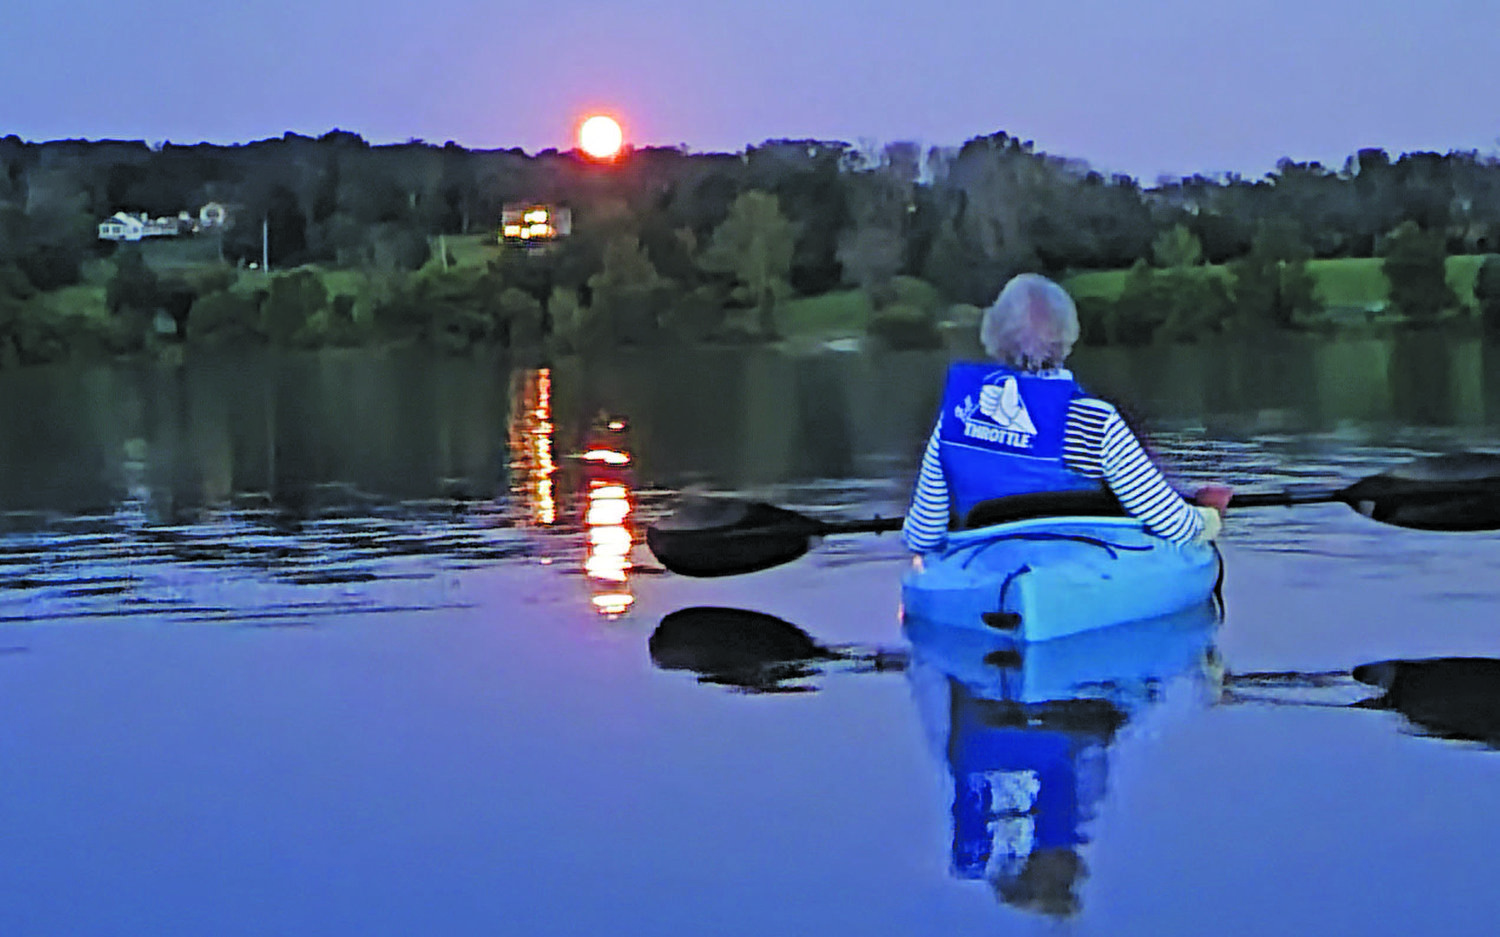 August: Marie Progin watches from her kayak as the late summer sun sets over Lake Galena in Peace Valley Park.